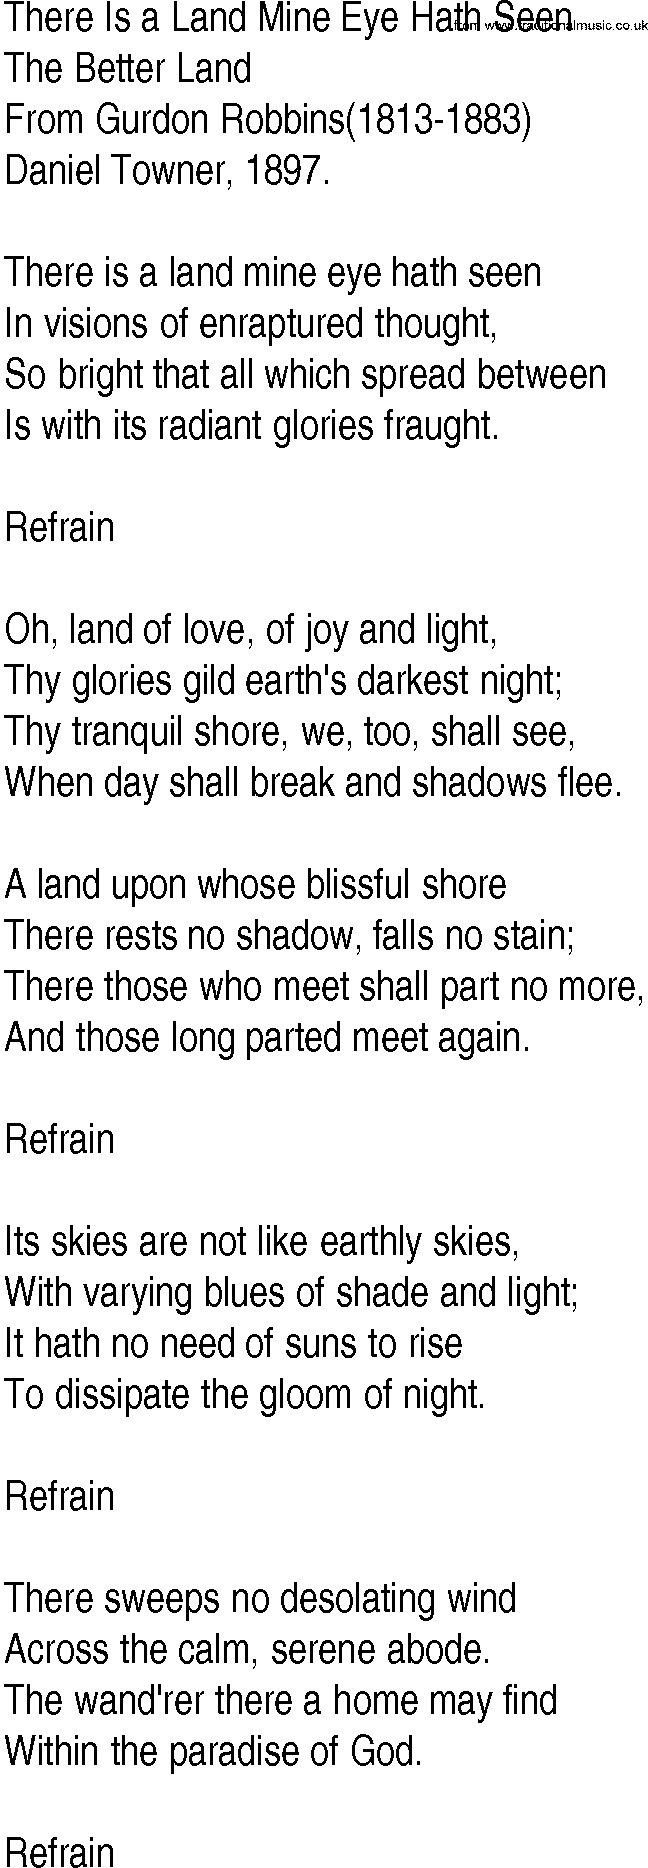 Hymn and Gospel Song: There Is a Land Mine Eye Hath Seen by From Gurdon Robbins lyrics